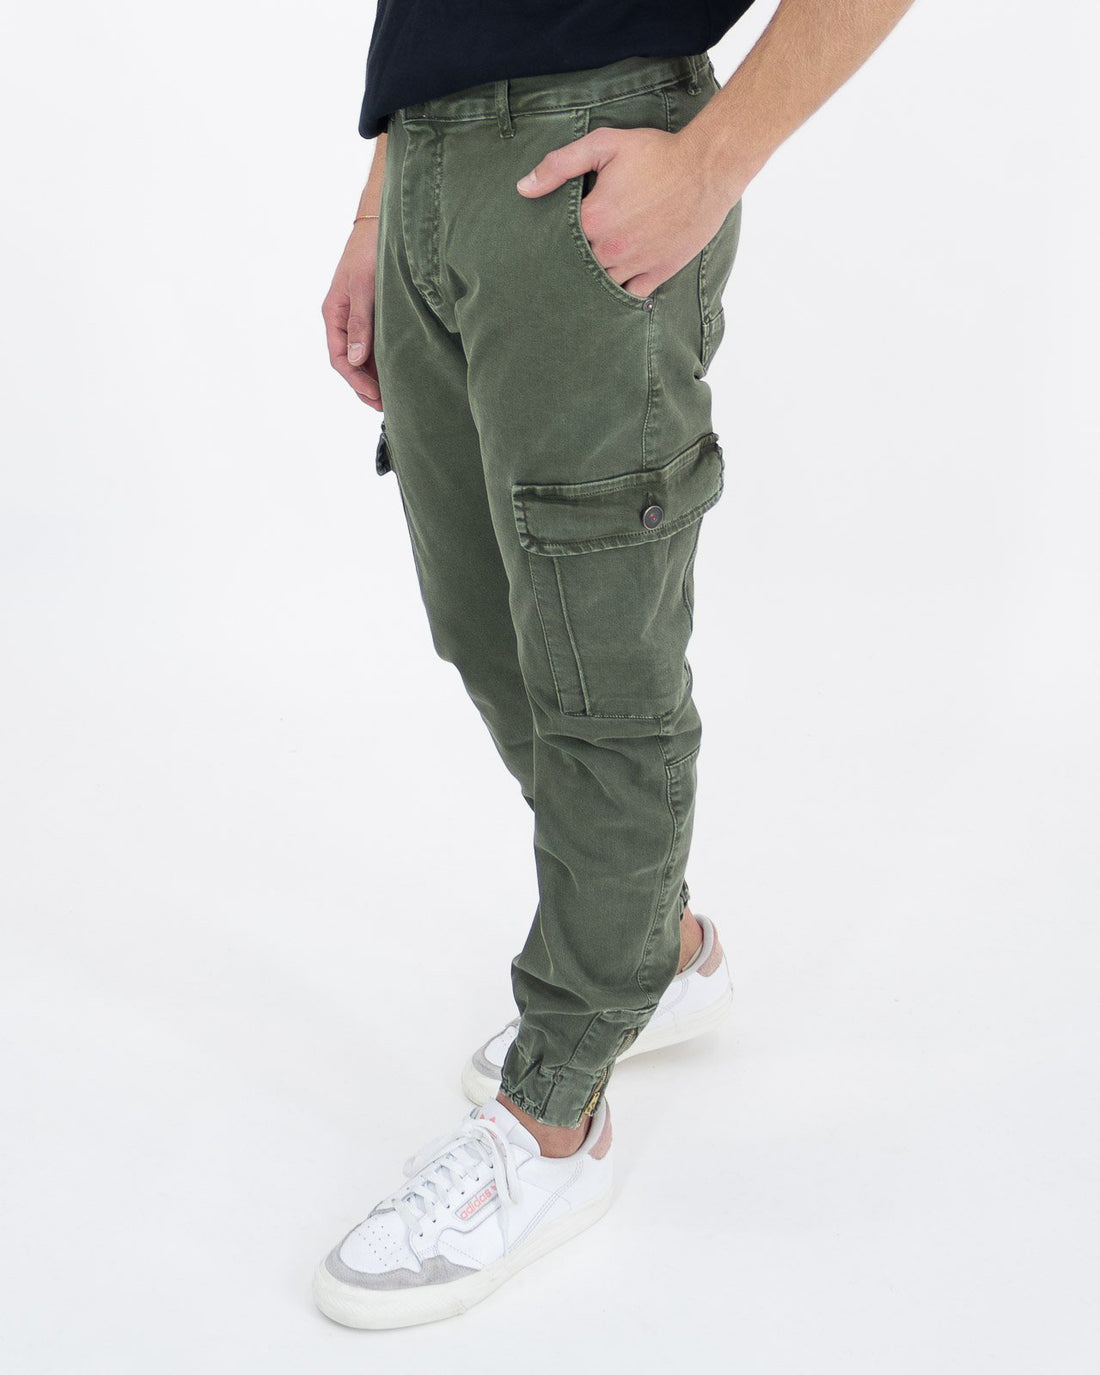 Trousers with pockets and cuffs